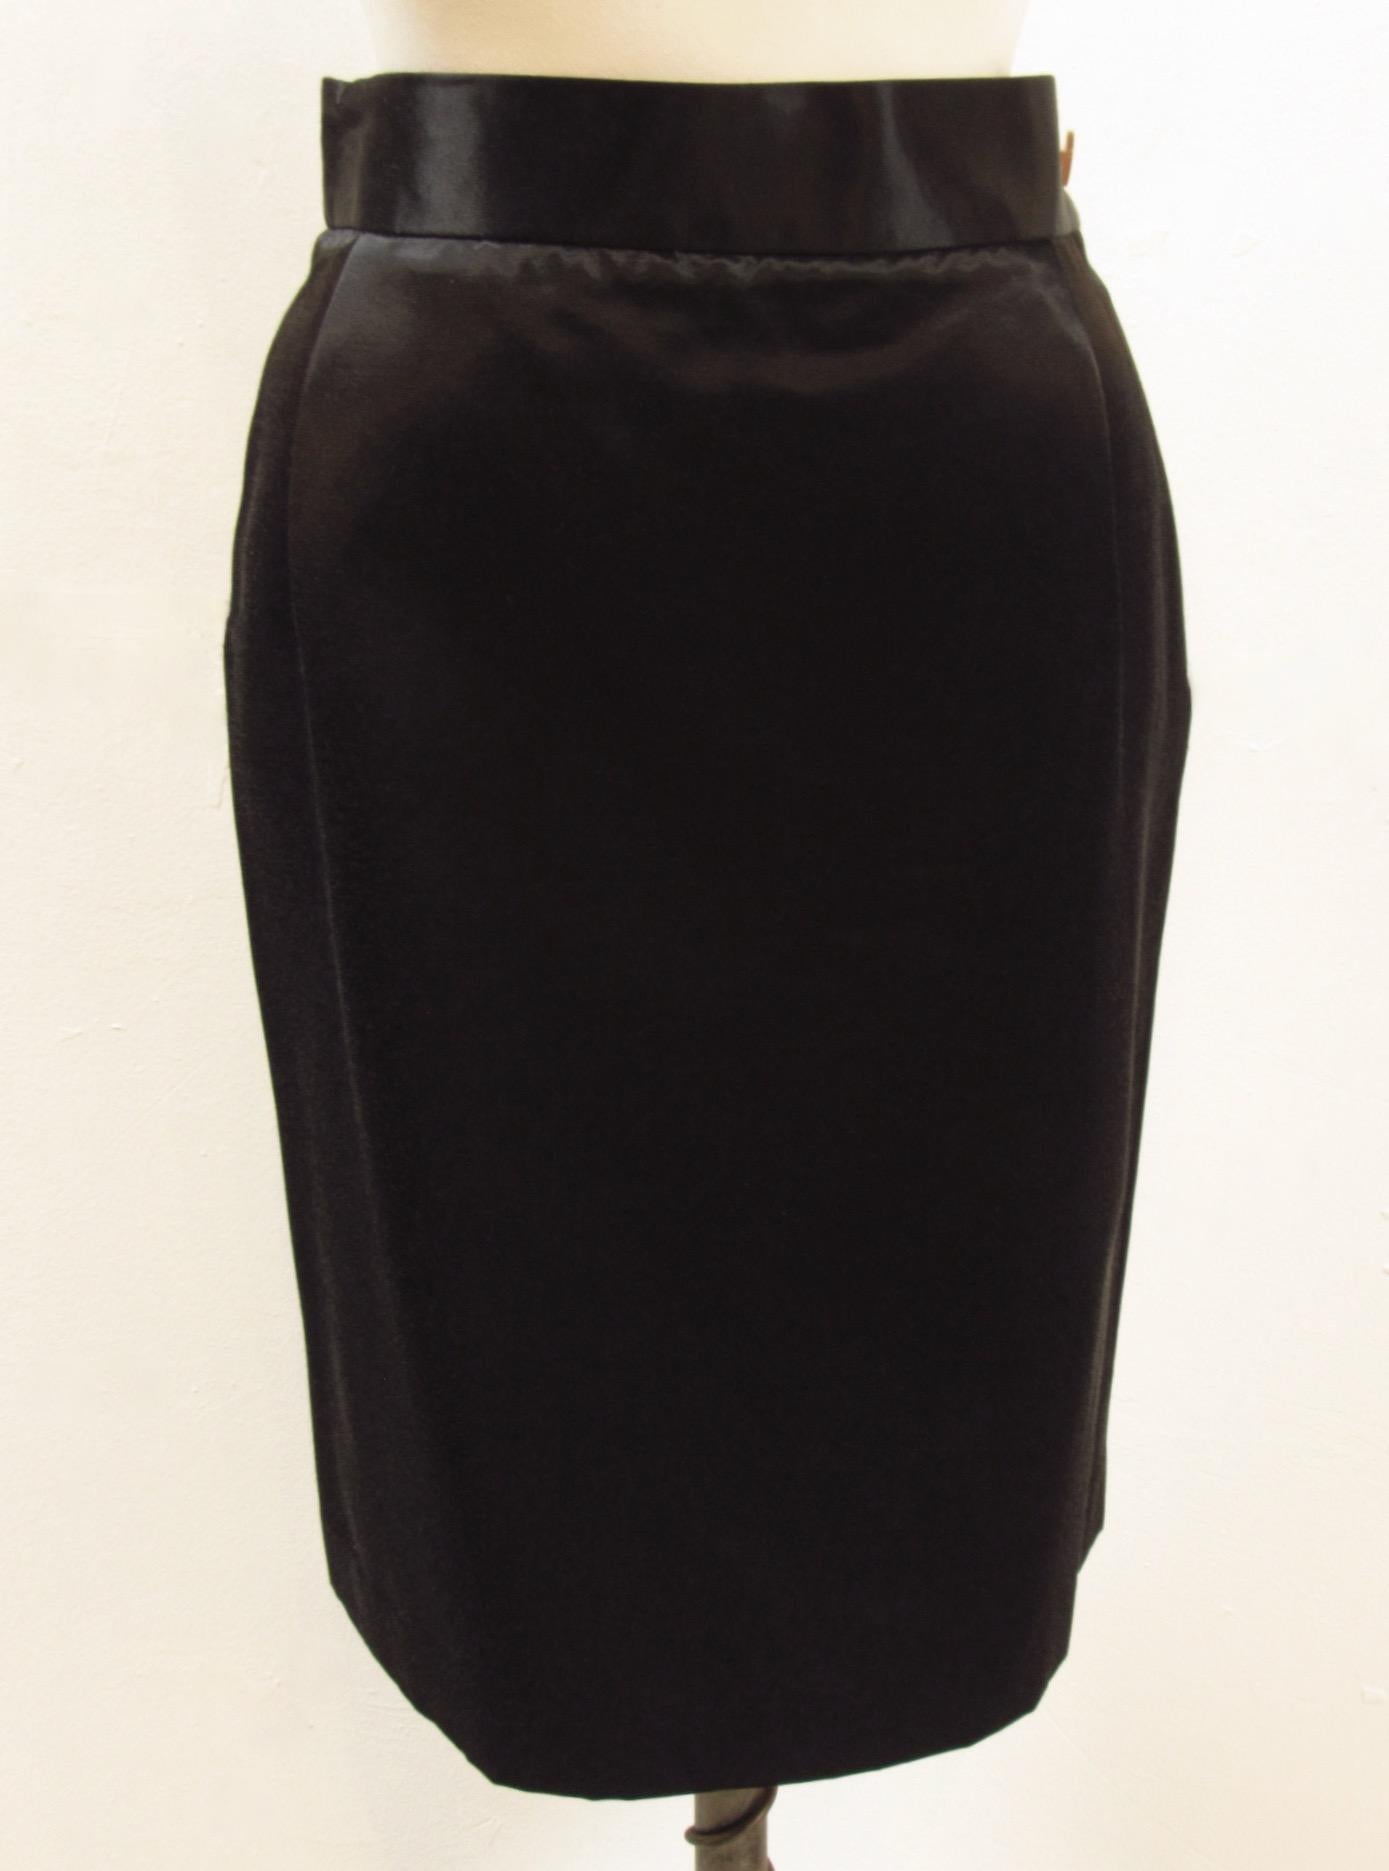 Gorgeous black satiny pencil skirt from vintage Red Label Vivienne Westwood has a side zip and signature logo button. Ample back slit.